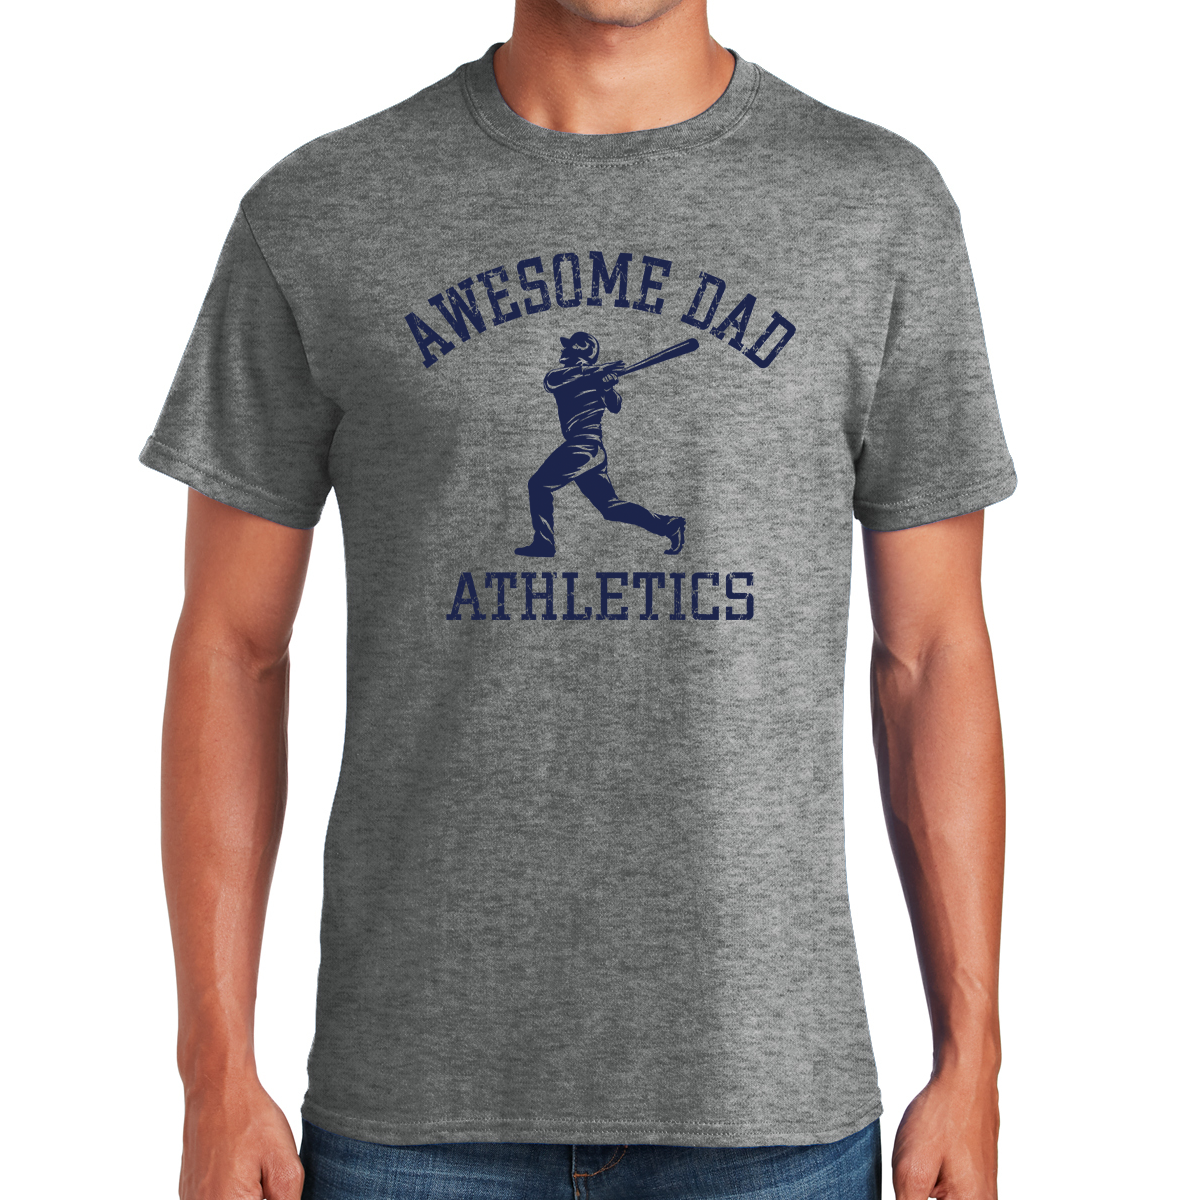 Awesome Dad Athletics Baseball Player Step Up to the Plate in Style Gifts for Dads T-shirt